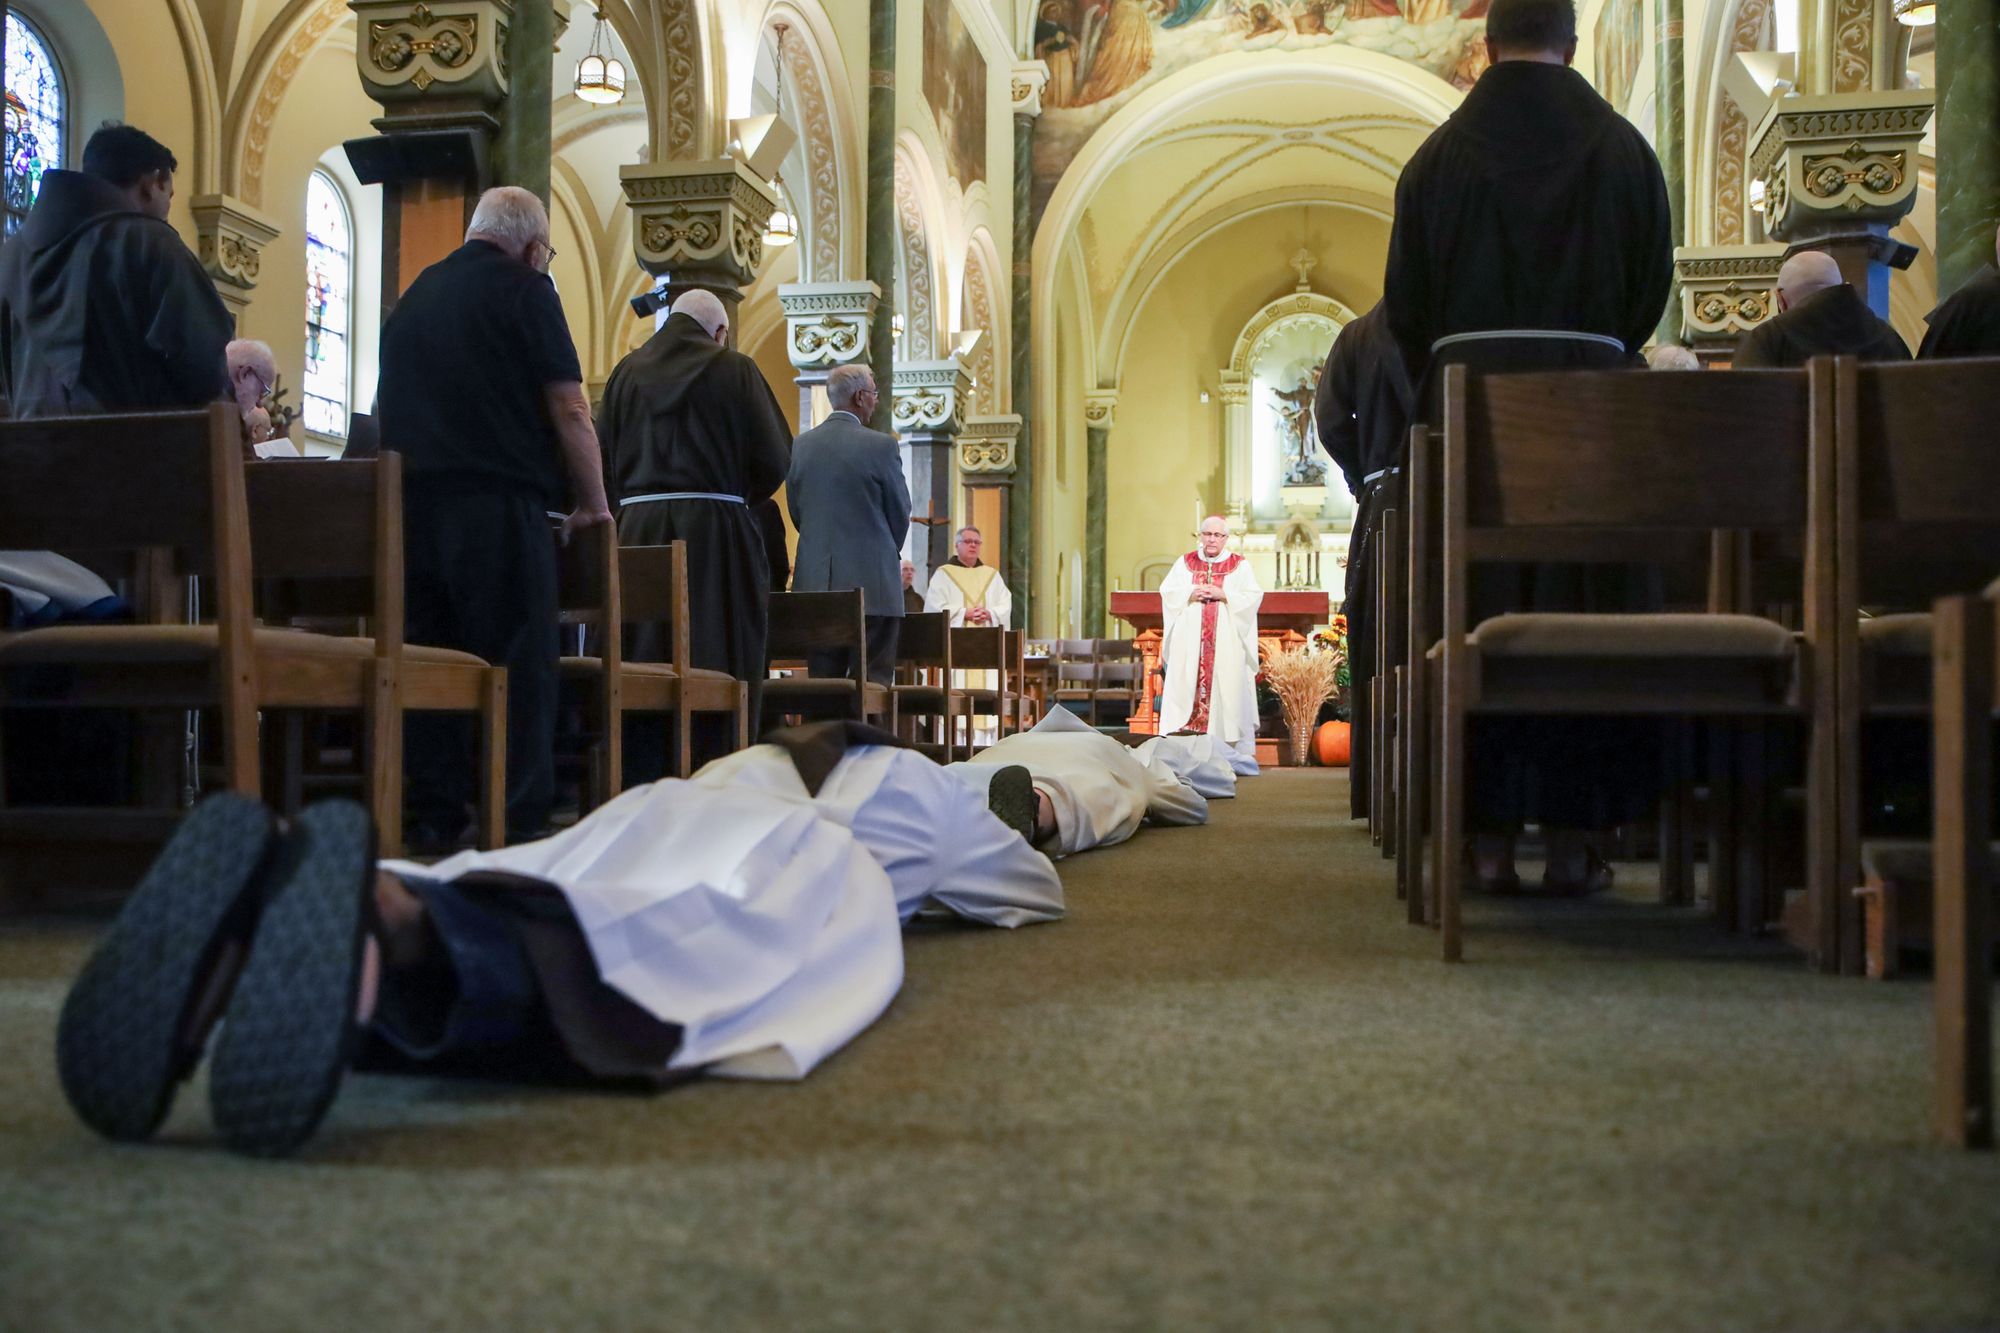 The ordinandi lie prostrate during the rite of ordination